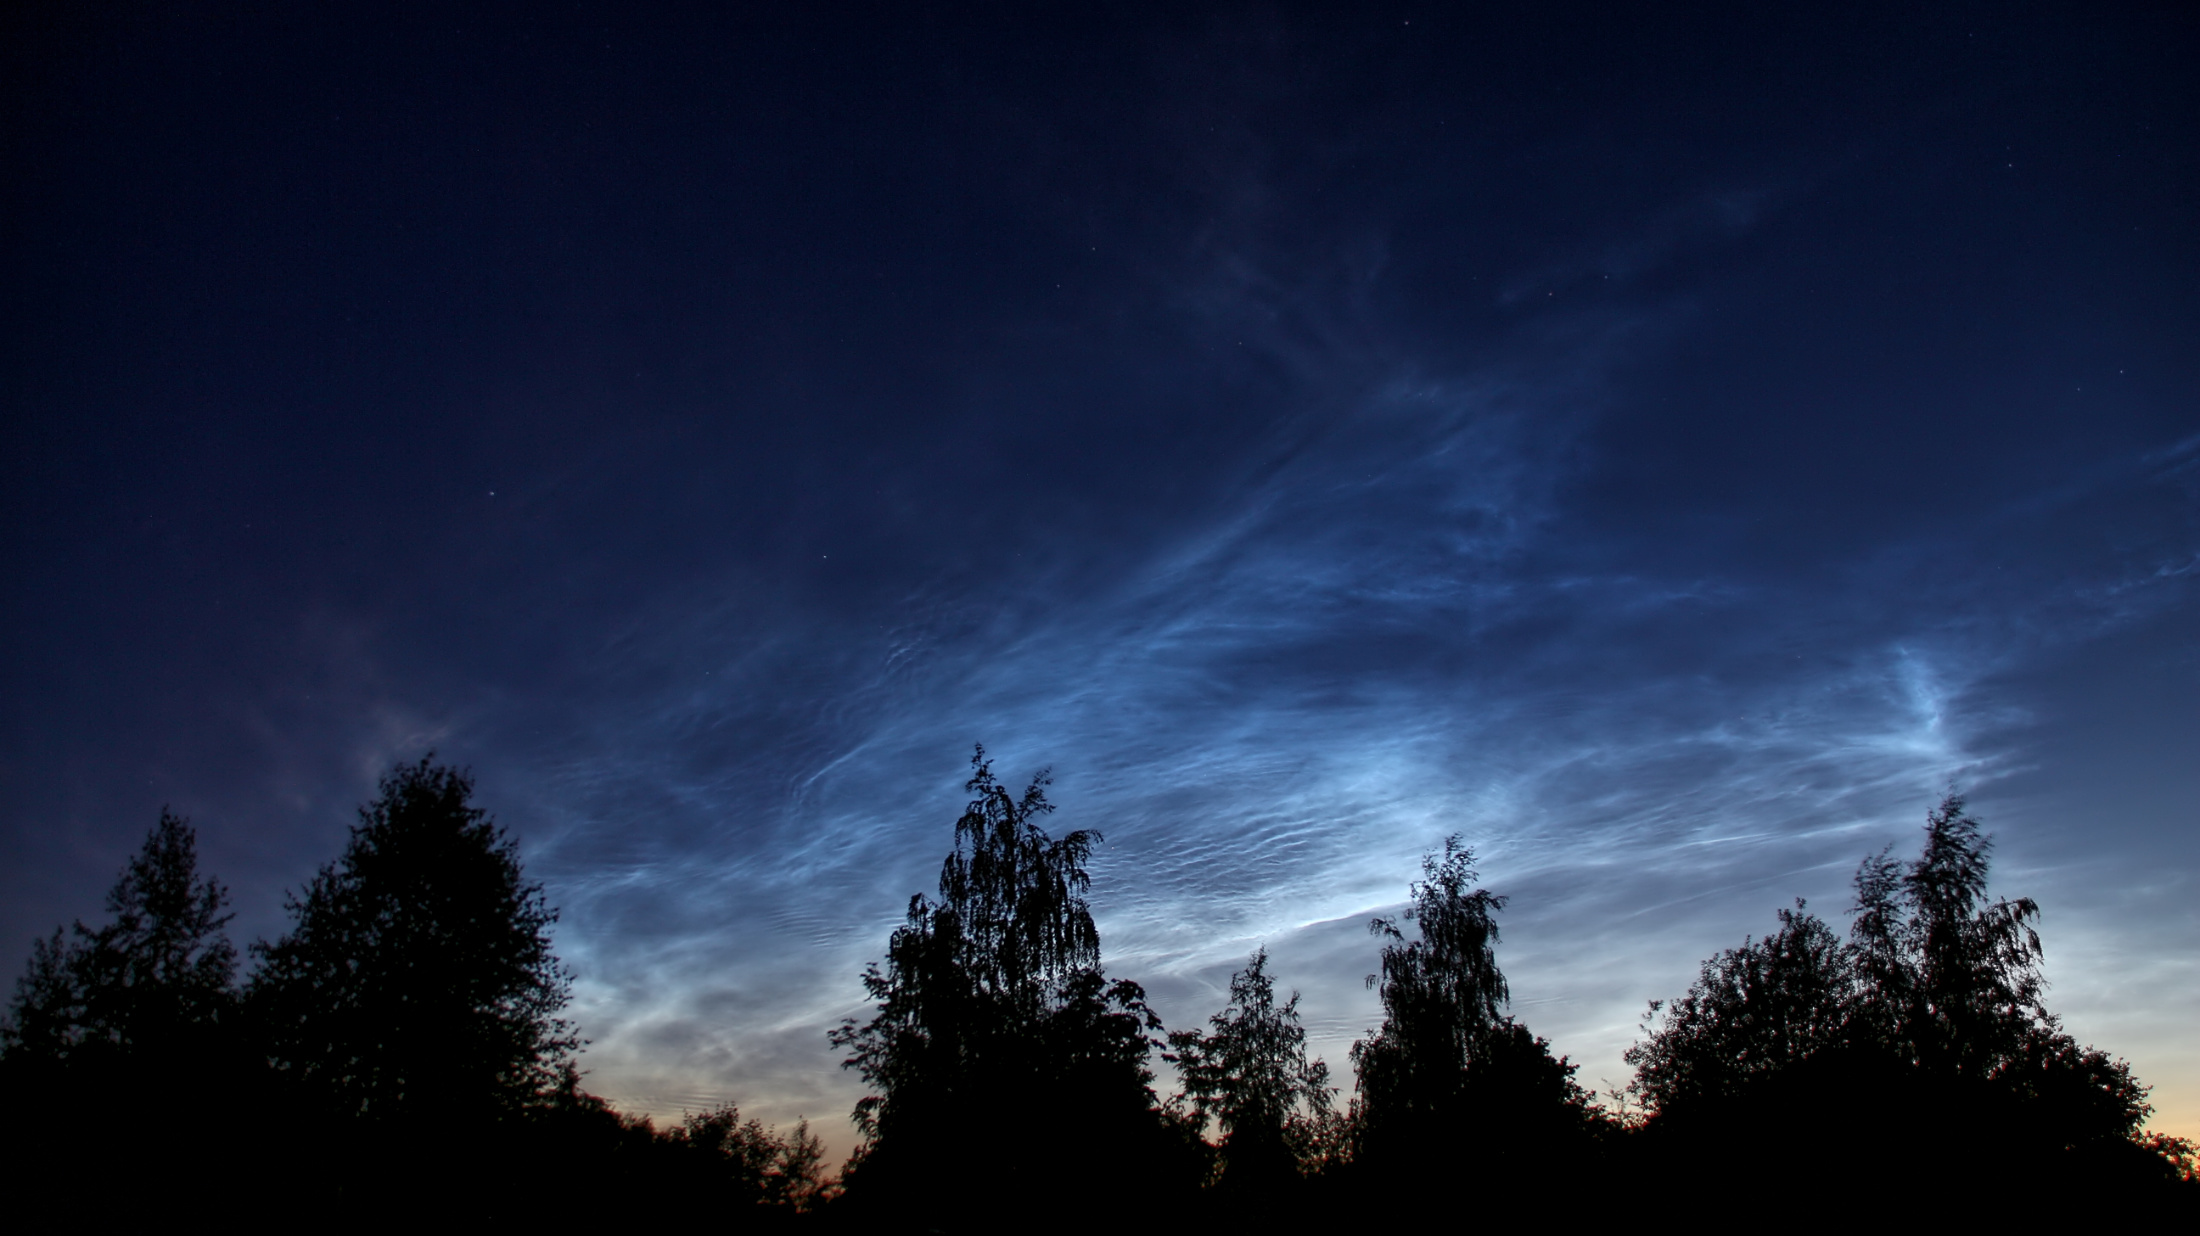 Noctilucent clouds in Wrocław